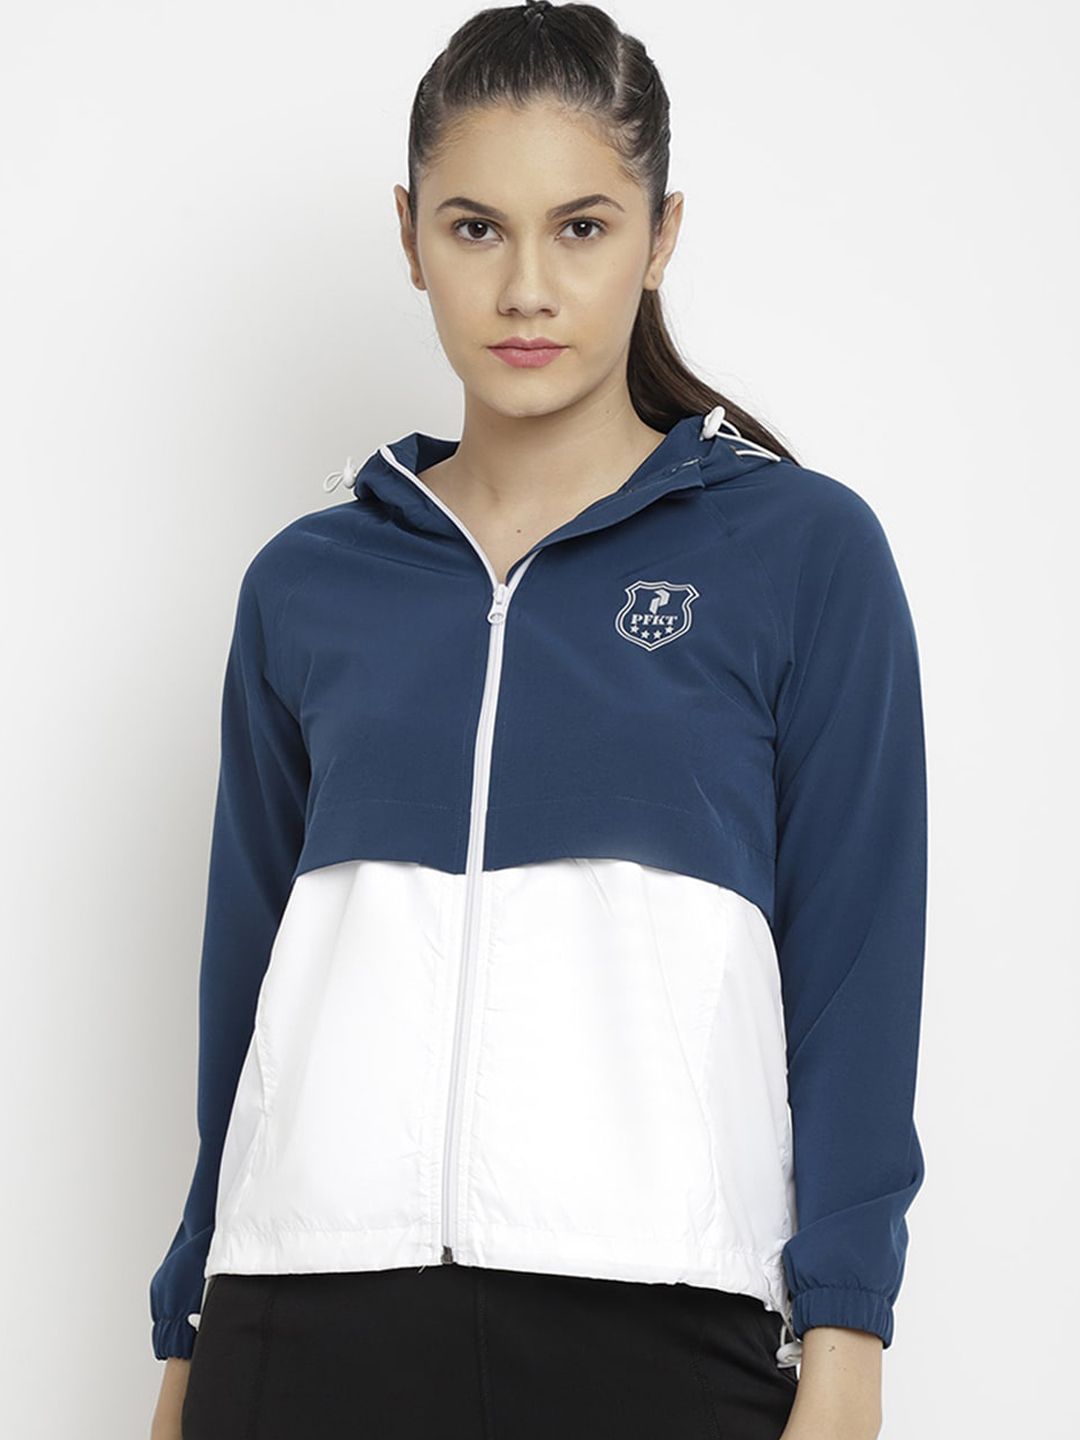 PERFKT-U Women Blue & White Colourblocked Lightweight Antimicrobial Running Sporty Jacket Price in India